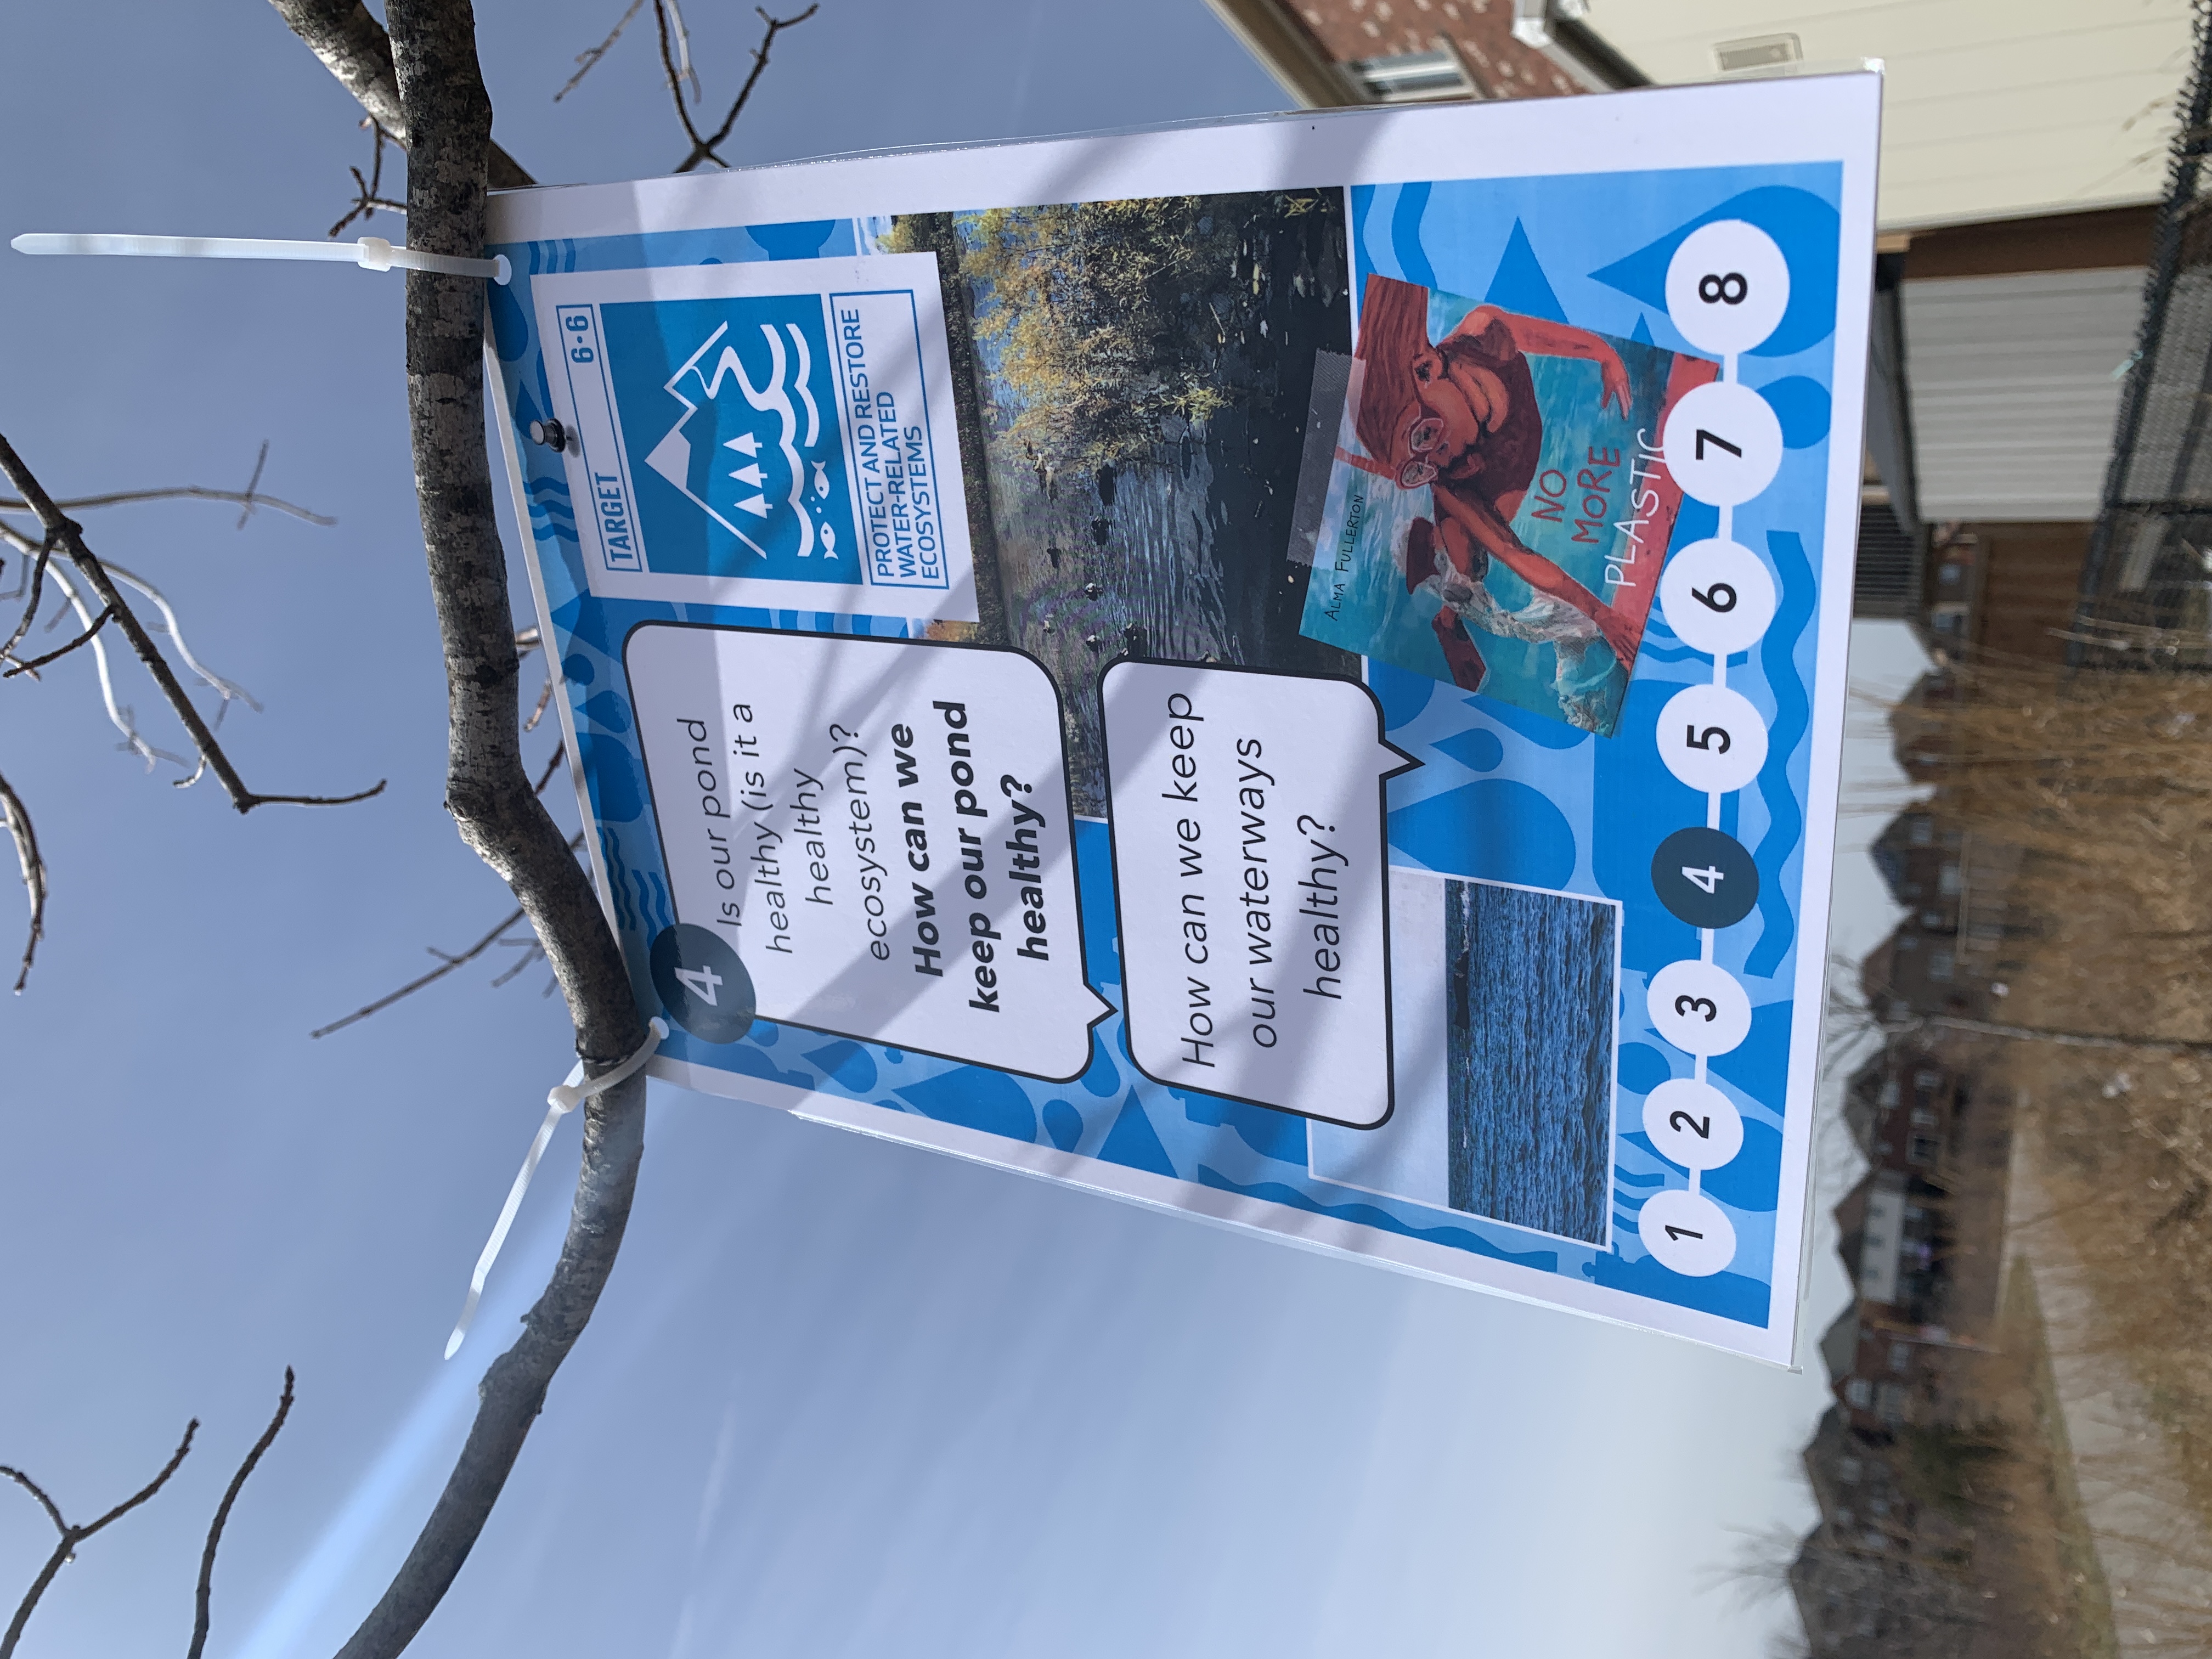 Blue poster hanging from tree on nature pathway including images and a reflective question. 